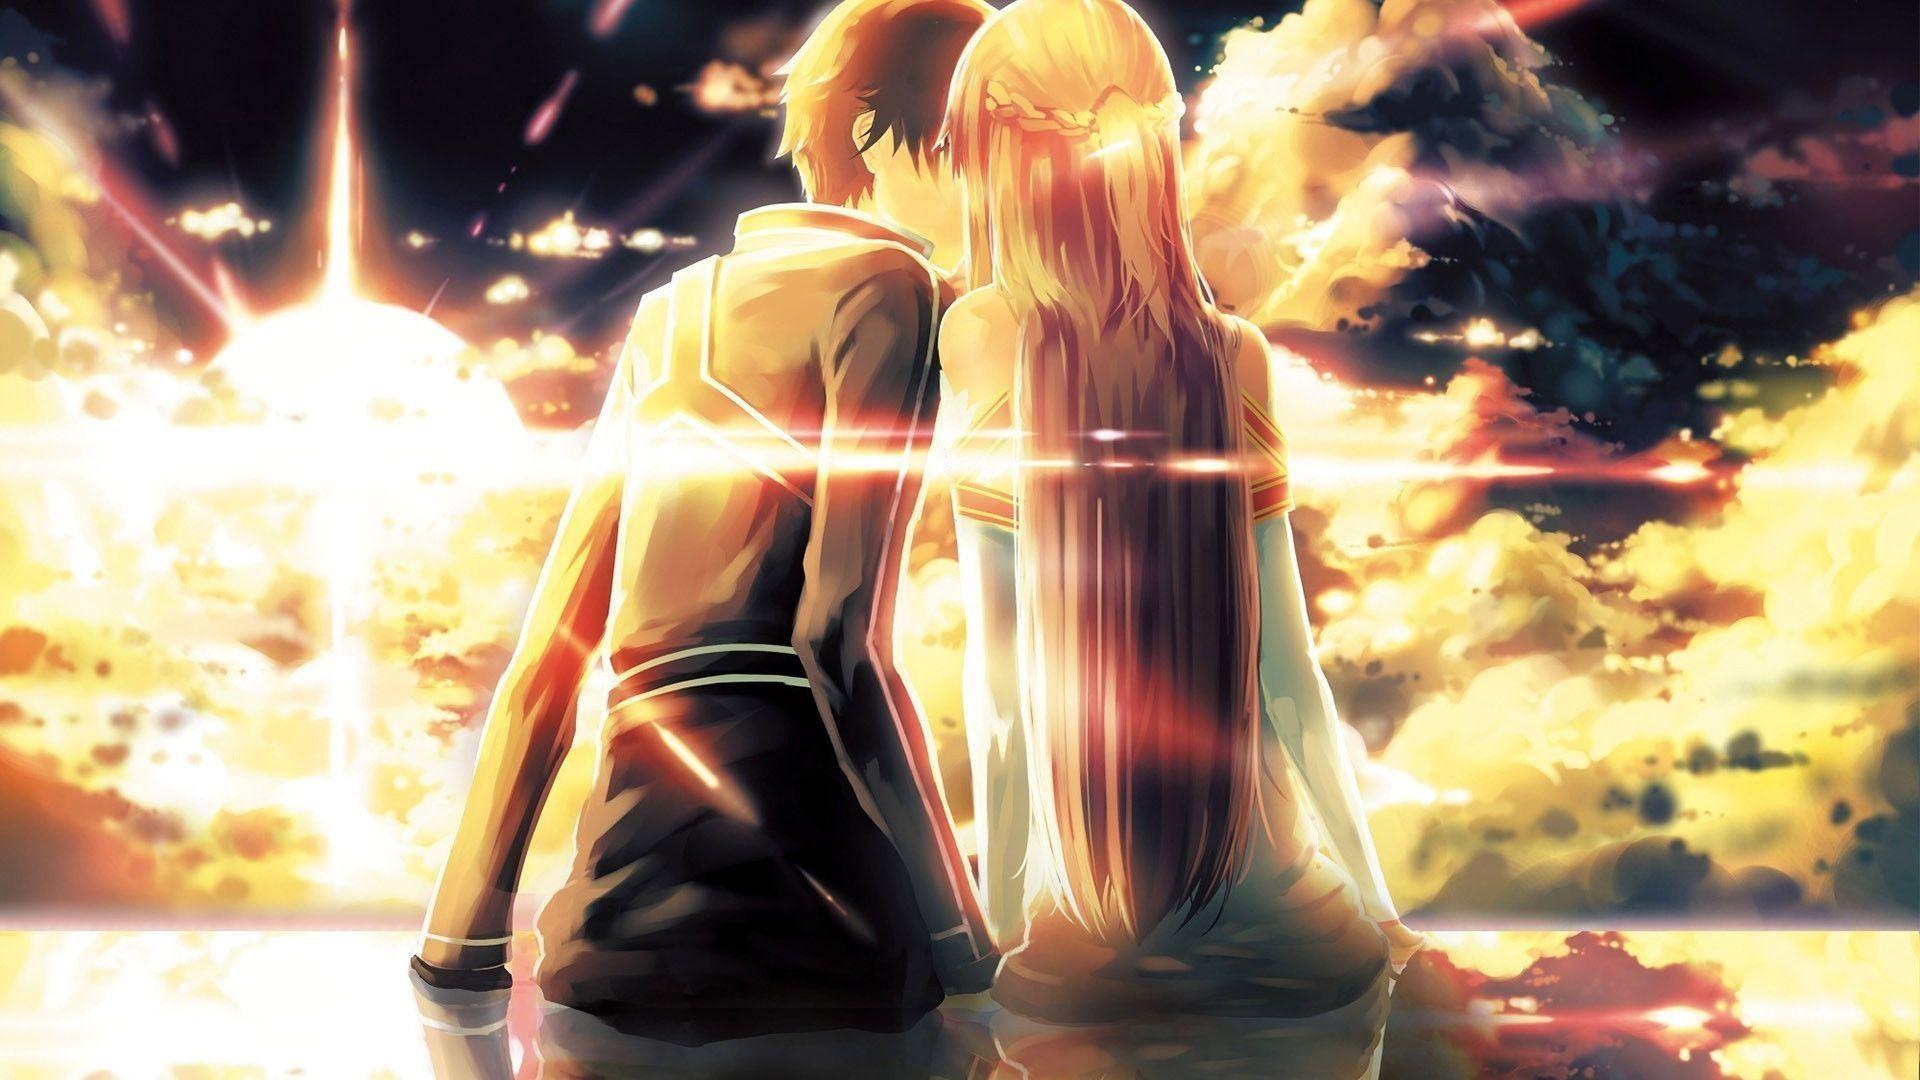 Download Couple Kissing During Nighttime Love Anime Wallpaper  Wallpapers com